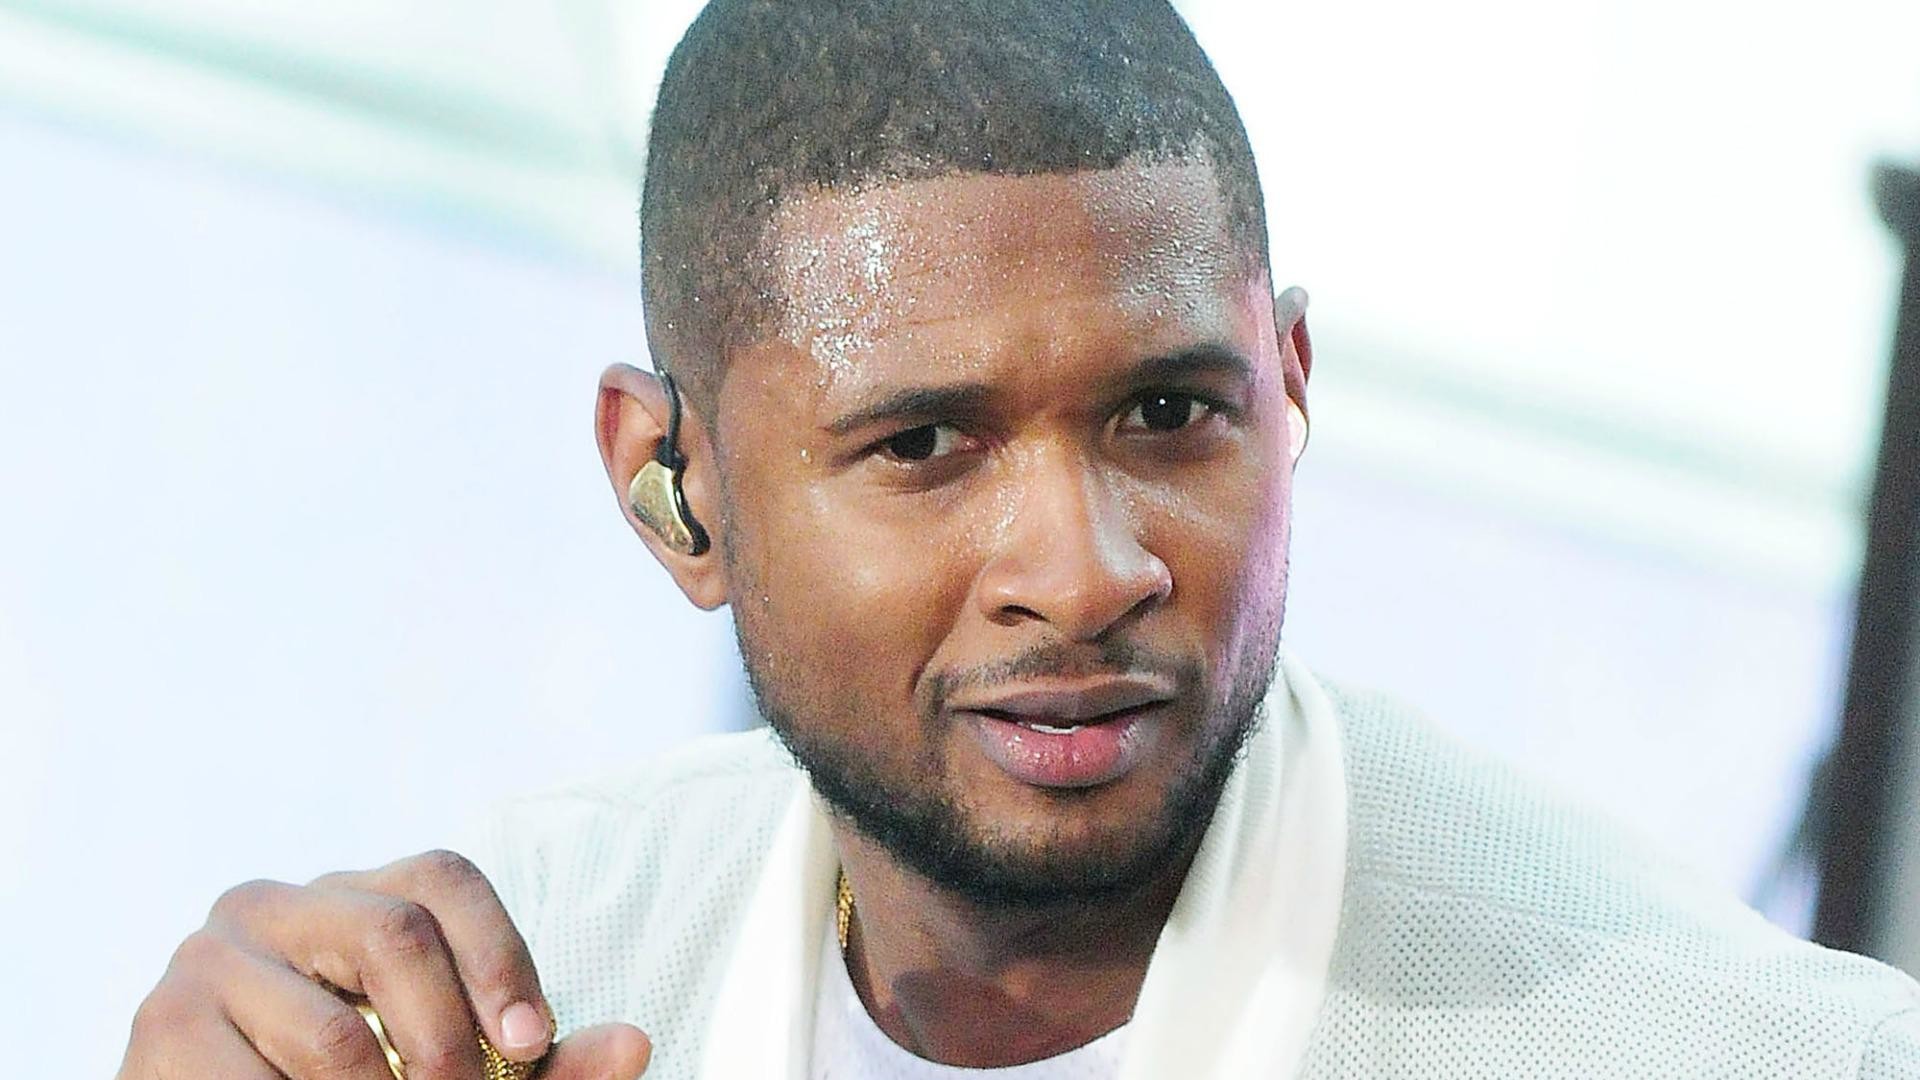 1920x1080 Hey Usher fans, here's your chance to see pictures of your favorite star's  junk